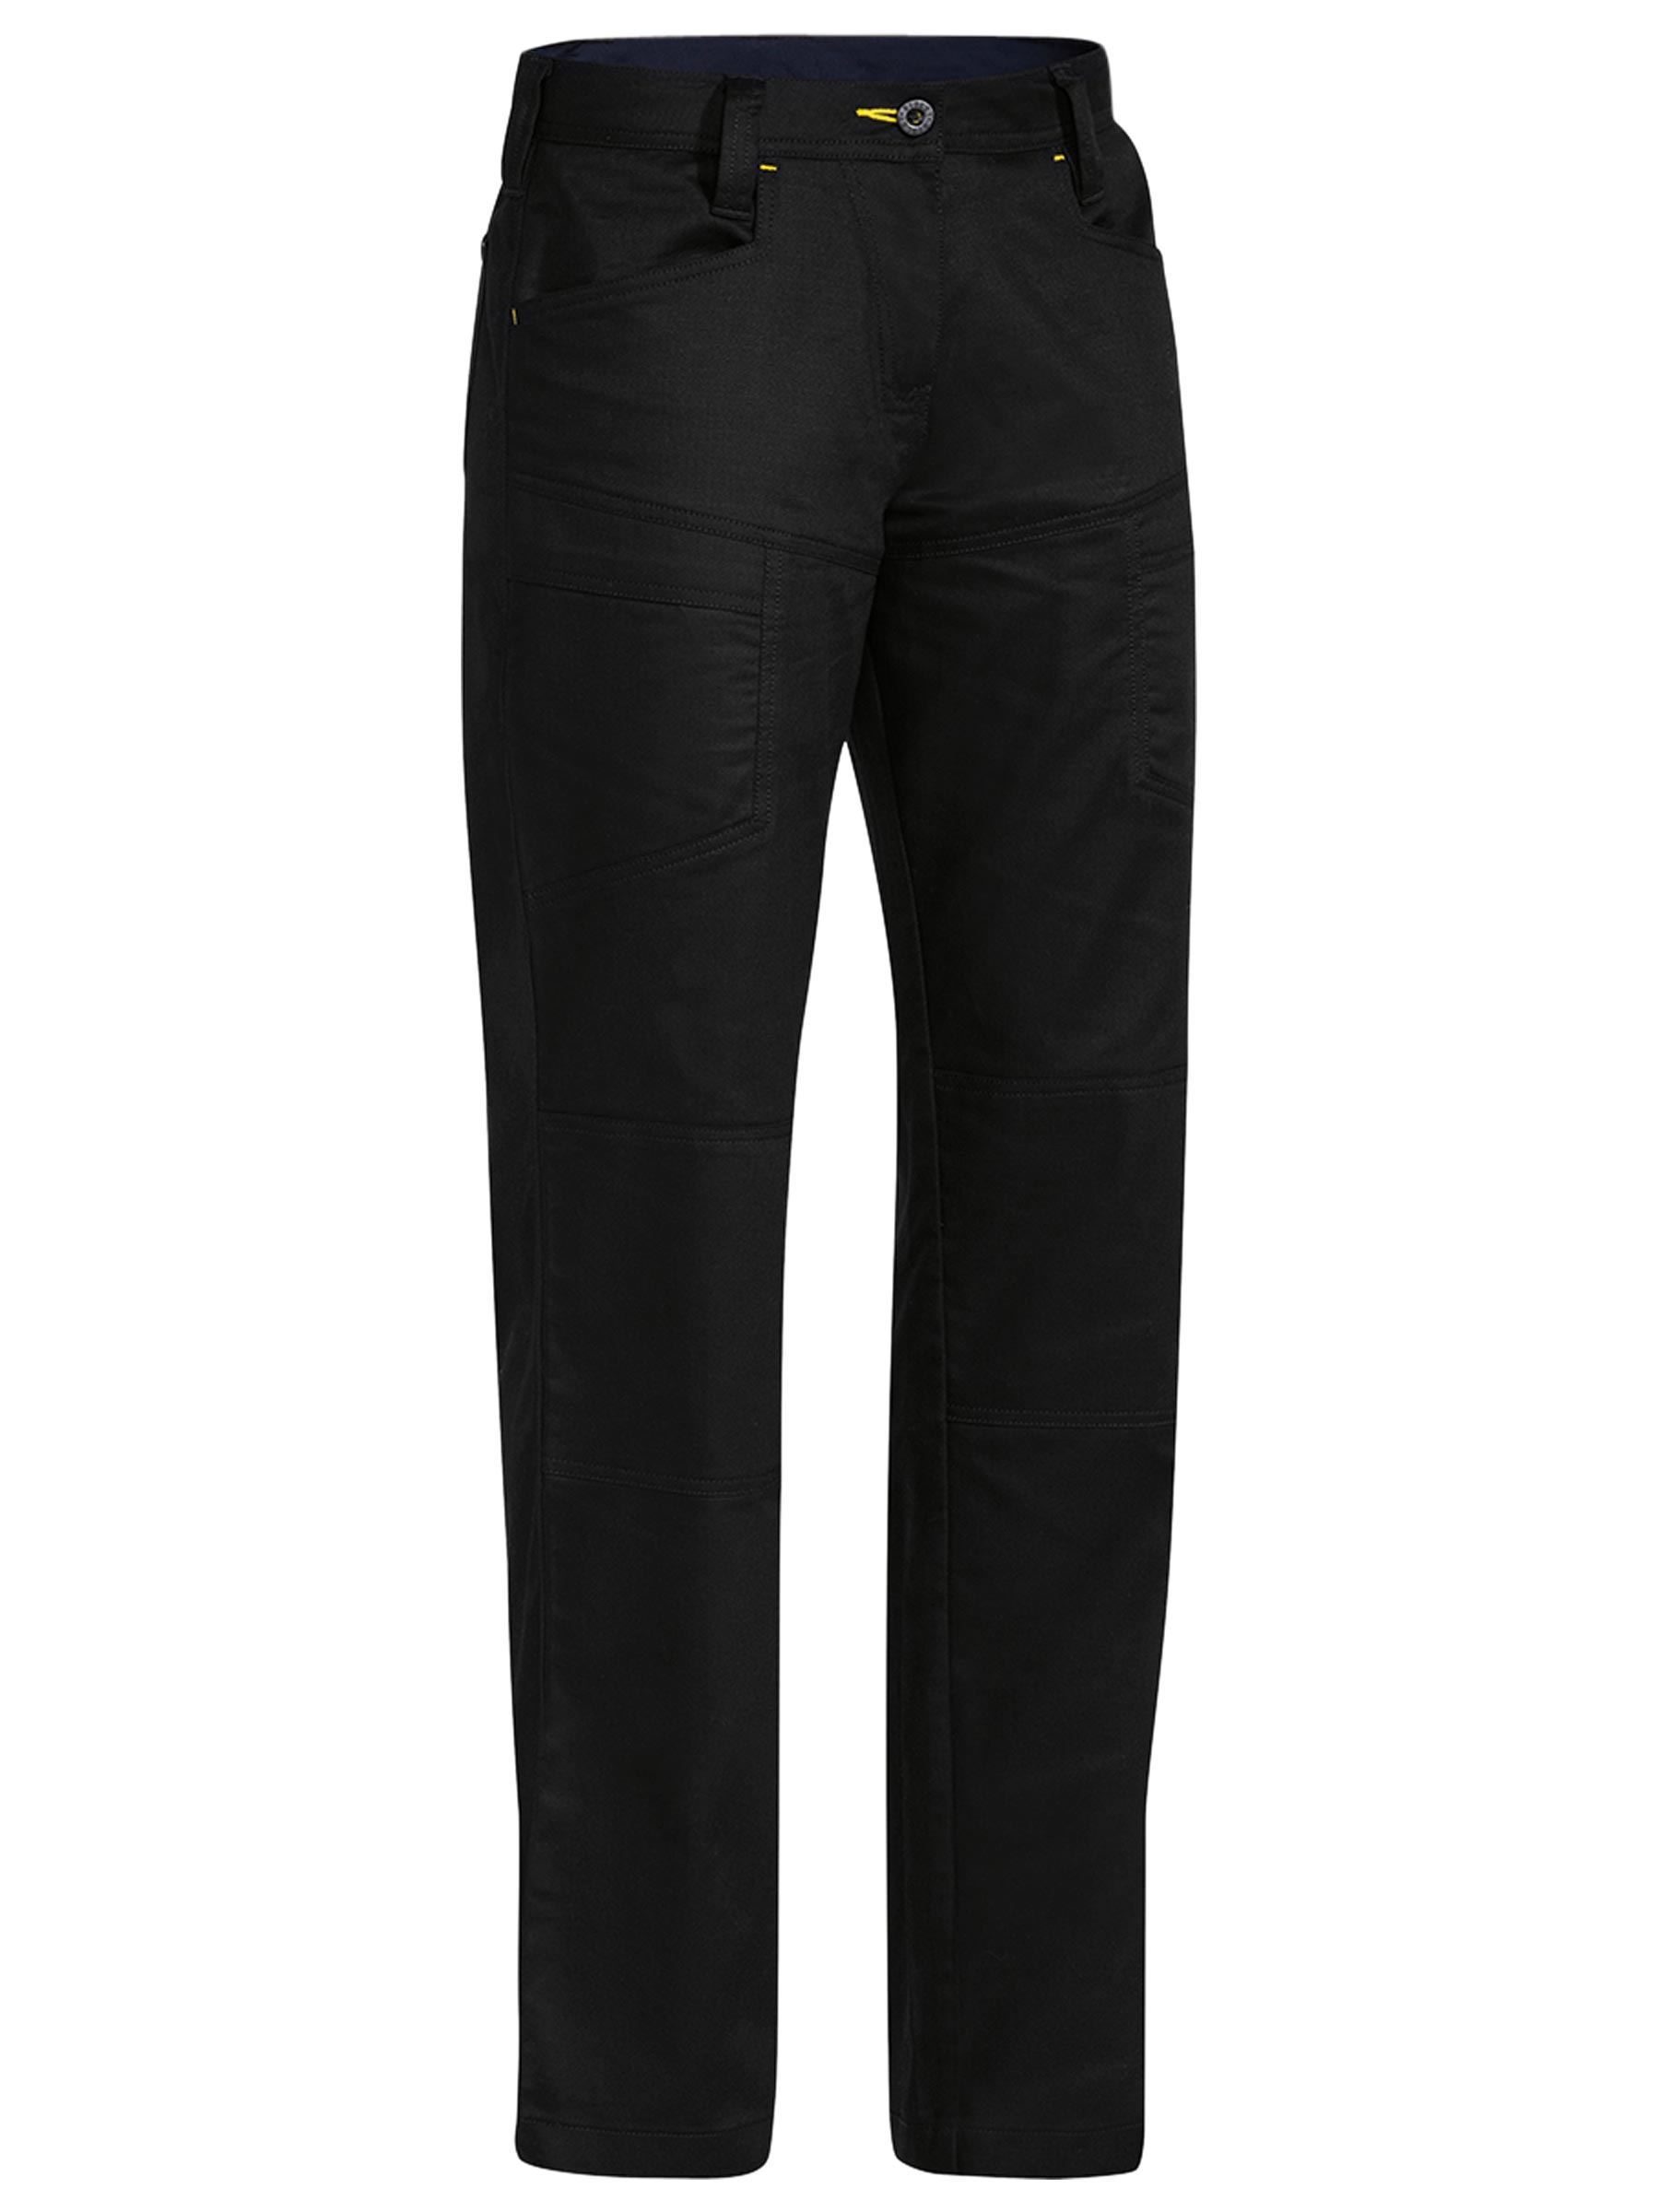 Womens X Airflow™ ripstop vented work pant with multi purpose pockets ...